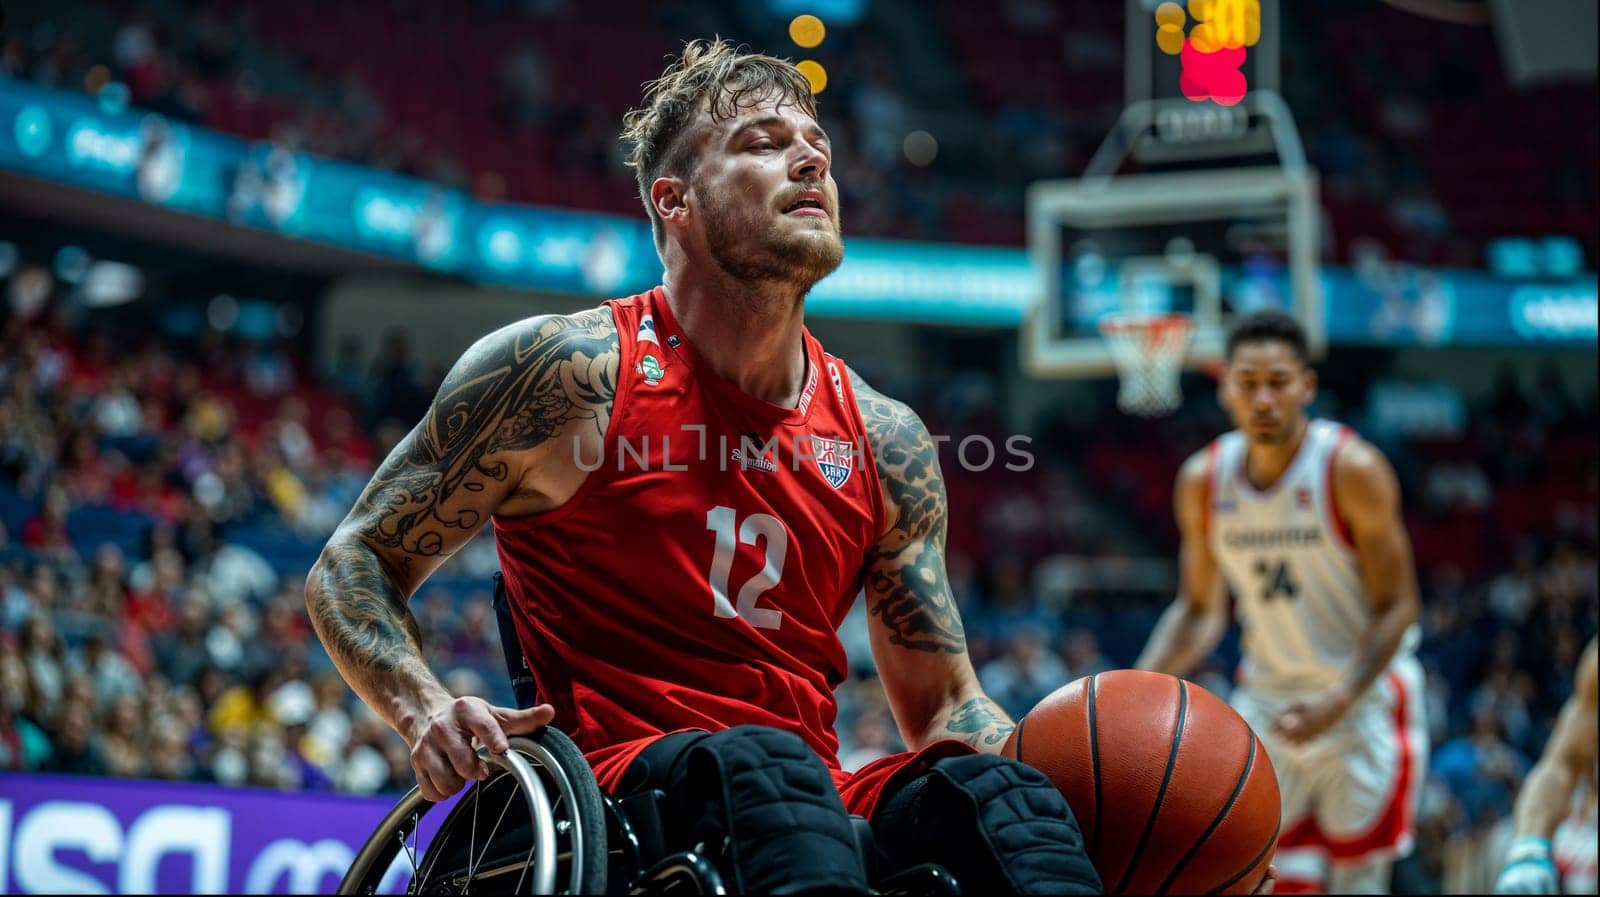 A man in a wheelchair passionately plays basketball on the court, showcasing athleticism and determination